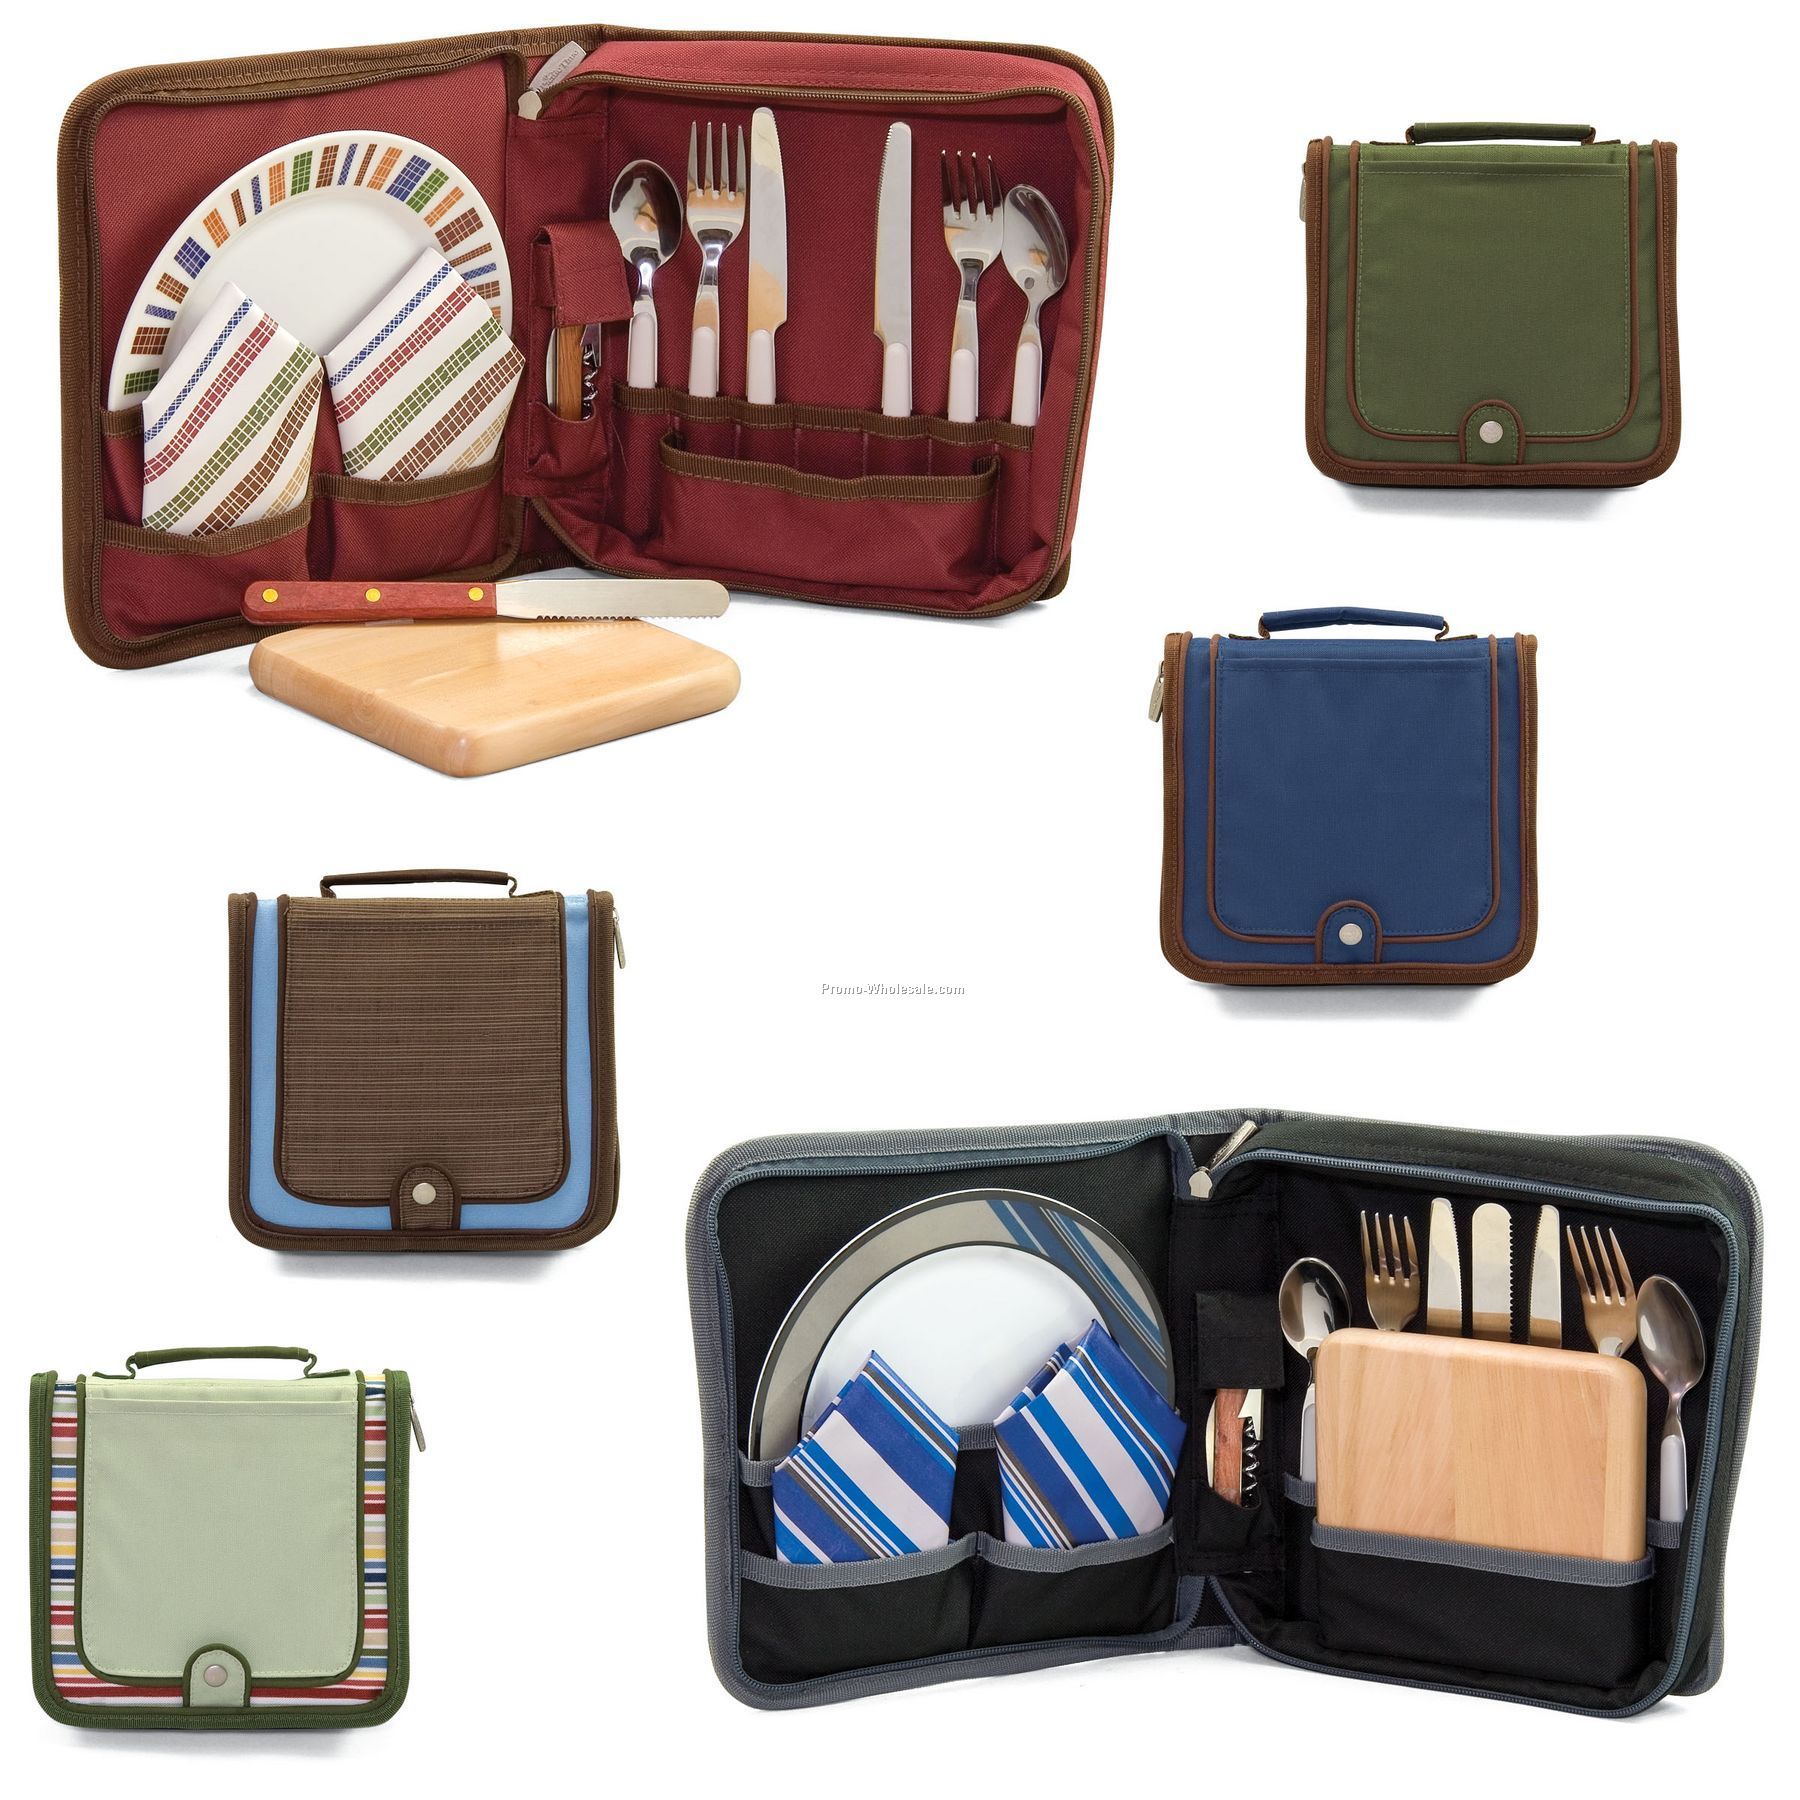 Piatto Travel Pack With Deluxe Wine & Cheese Service For 2